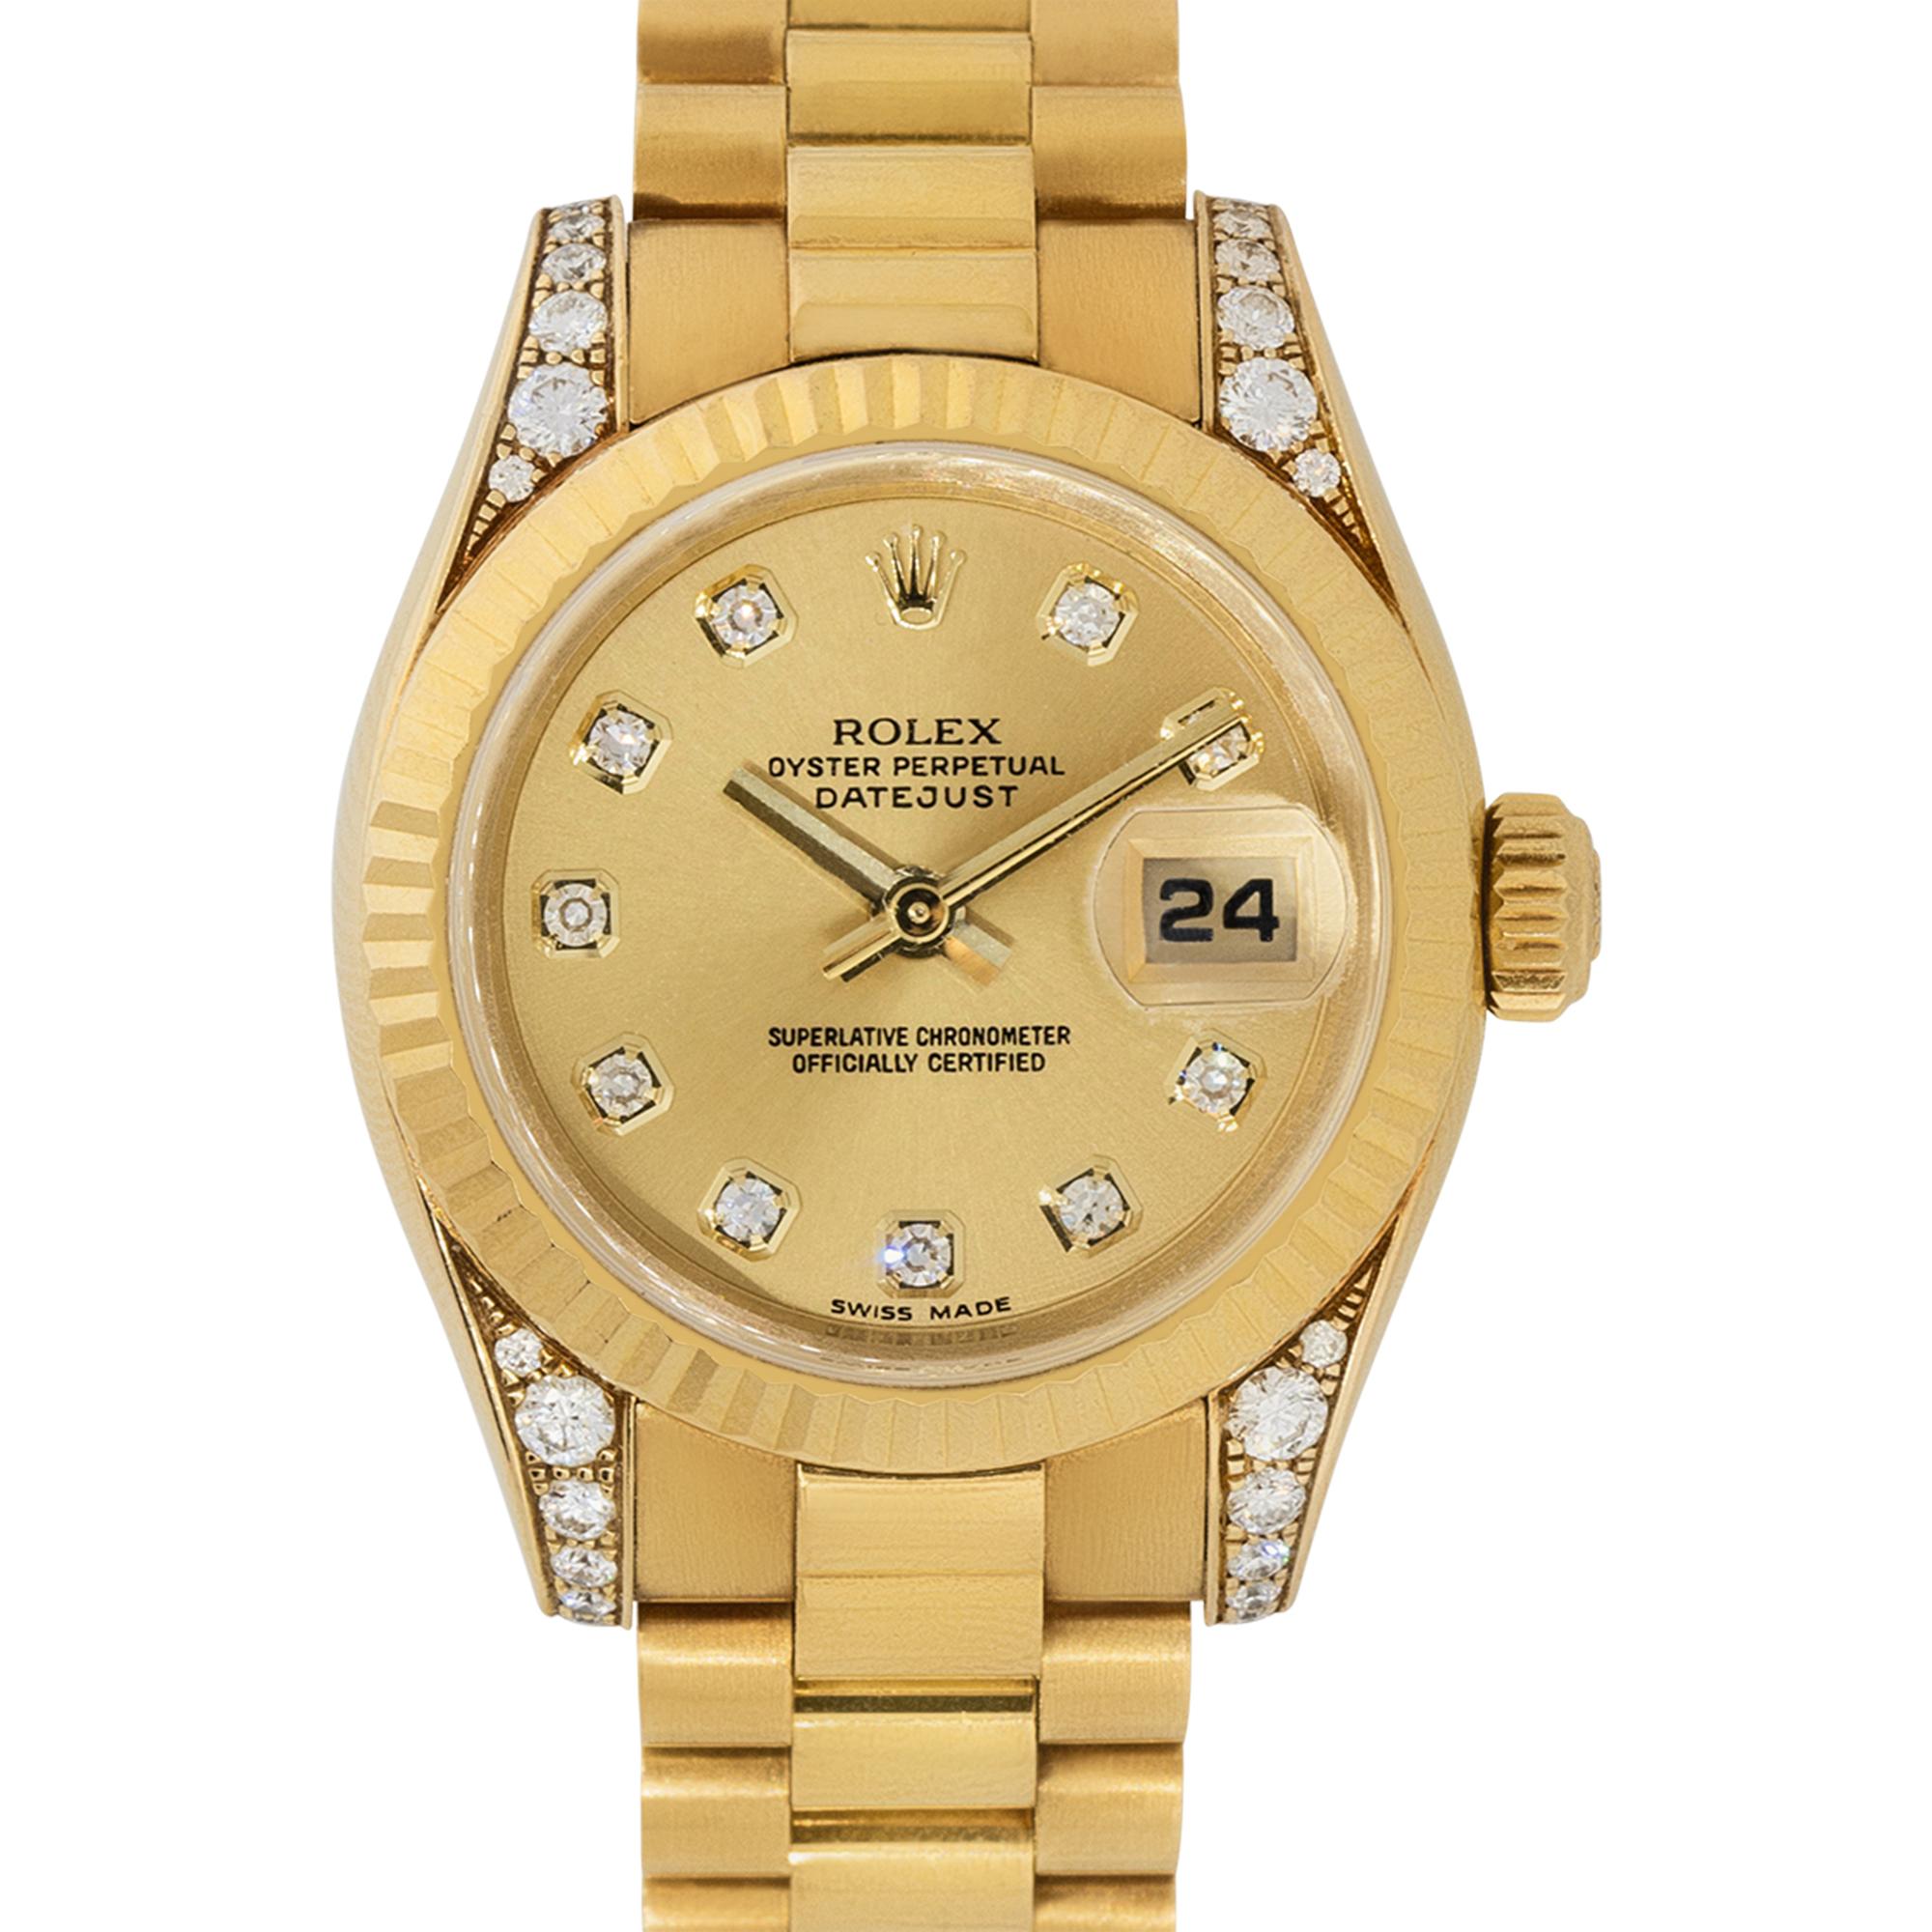 Brand: Rolex
MPN: 179238
Model: Datejust
Case Material: 18k Yellow Gold with Diamonds
Case Diameter: 26 mm
Bezel: 18k Yellow Gold Fluted bezel
Dial: Champagne dial with Diamond hour markers and yellow gold hands. Date can be found at 3